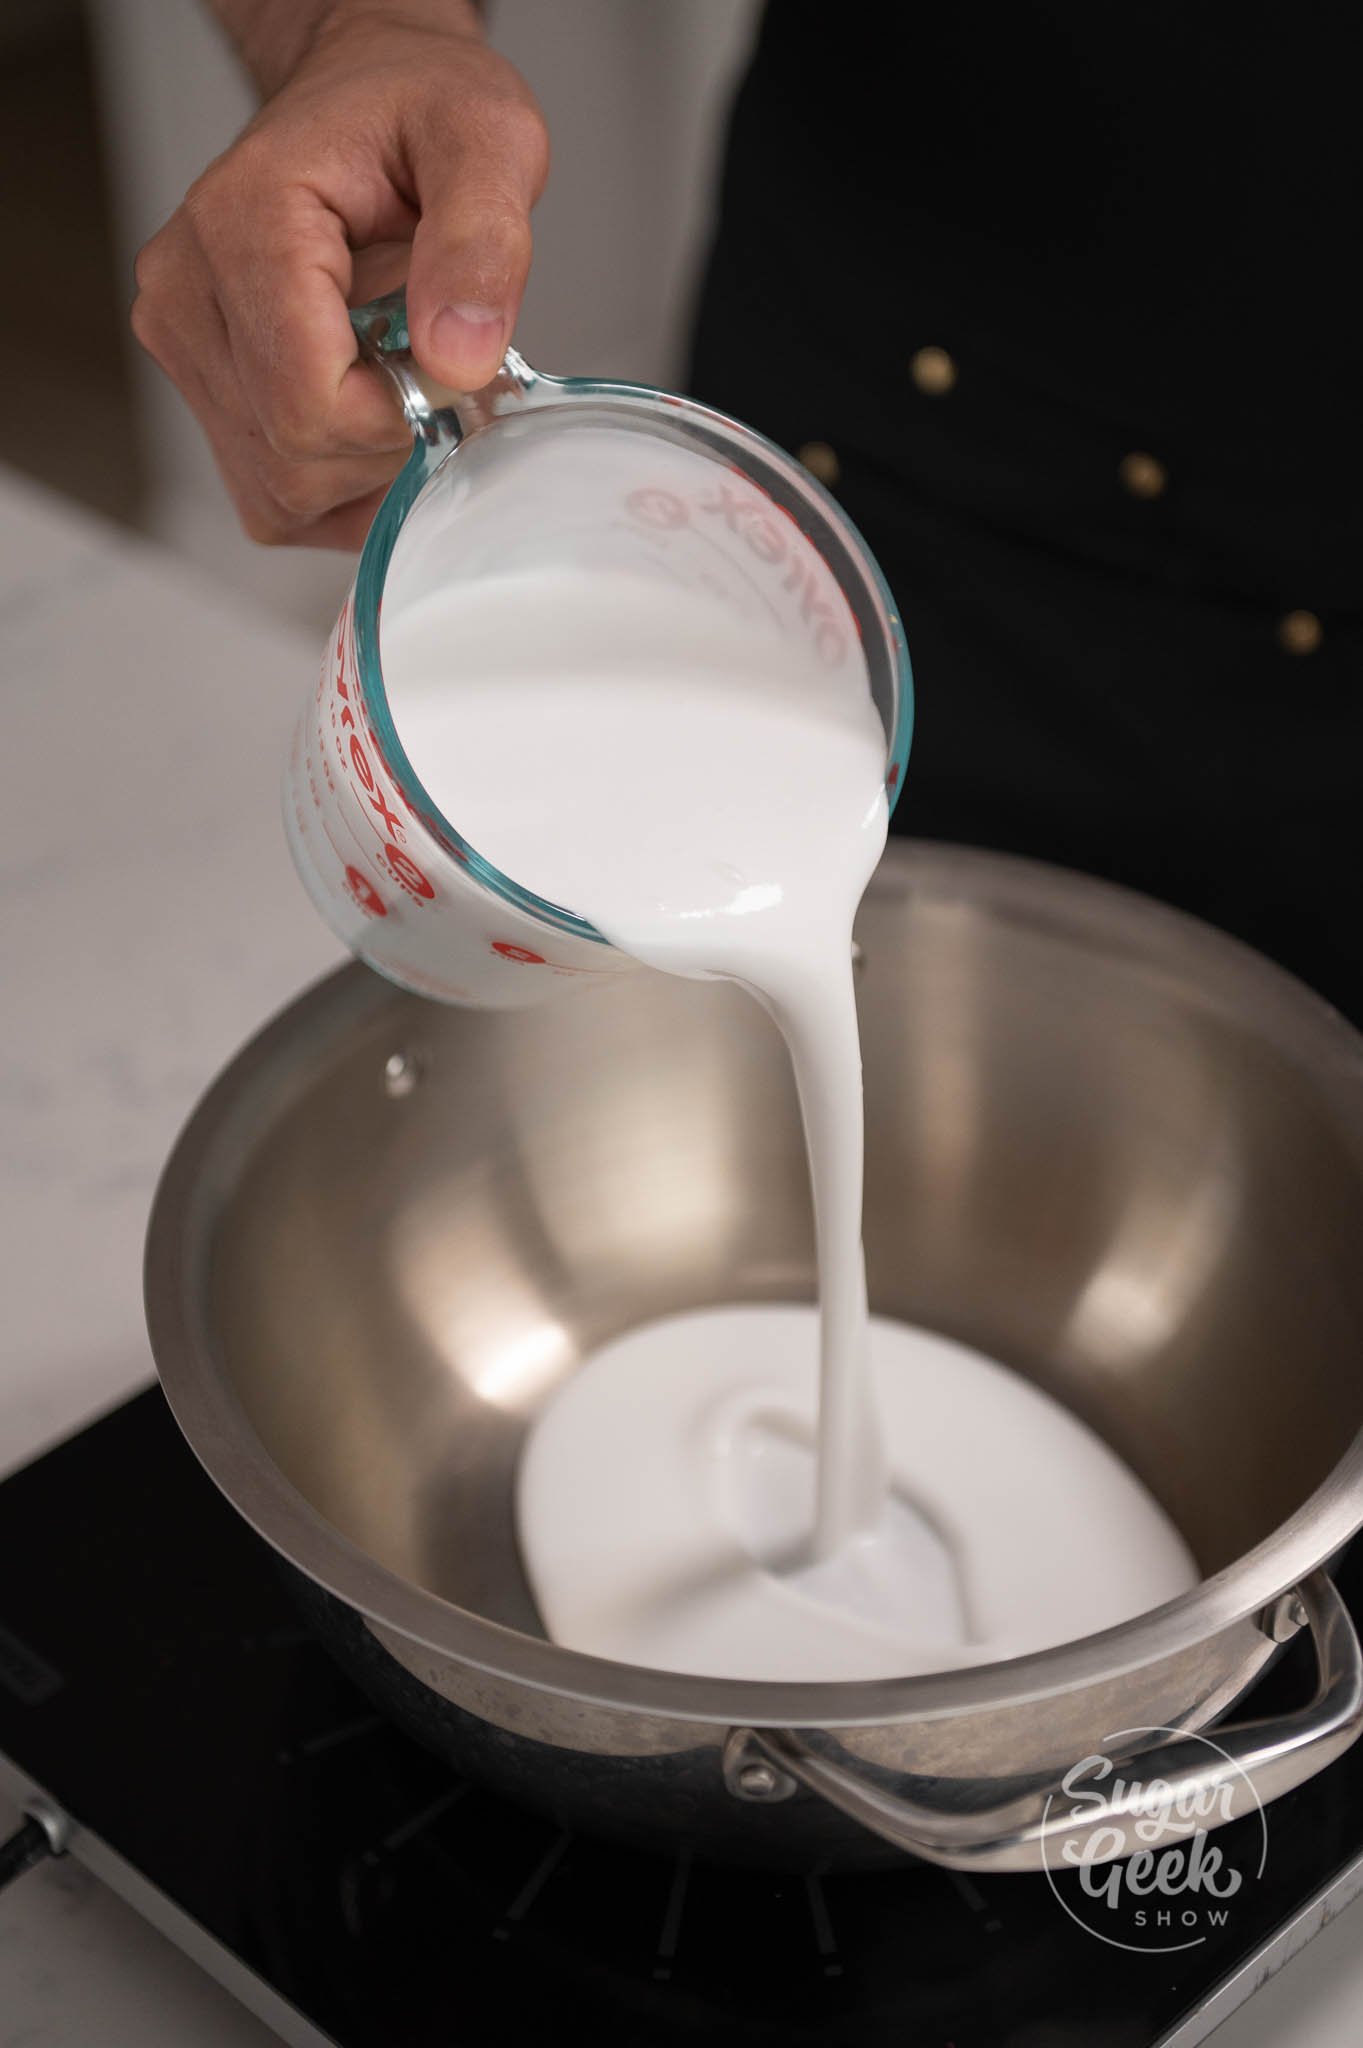 hand pouring measurement of cream into pot.